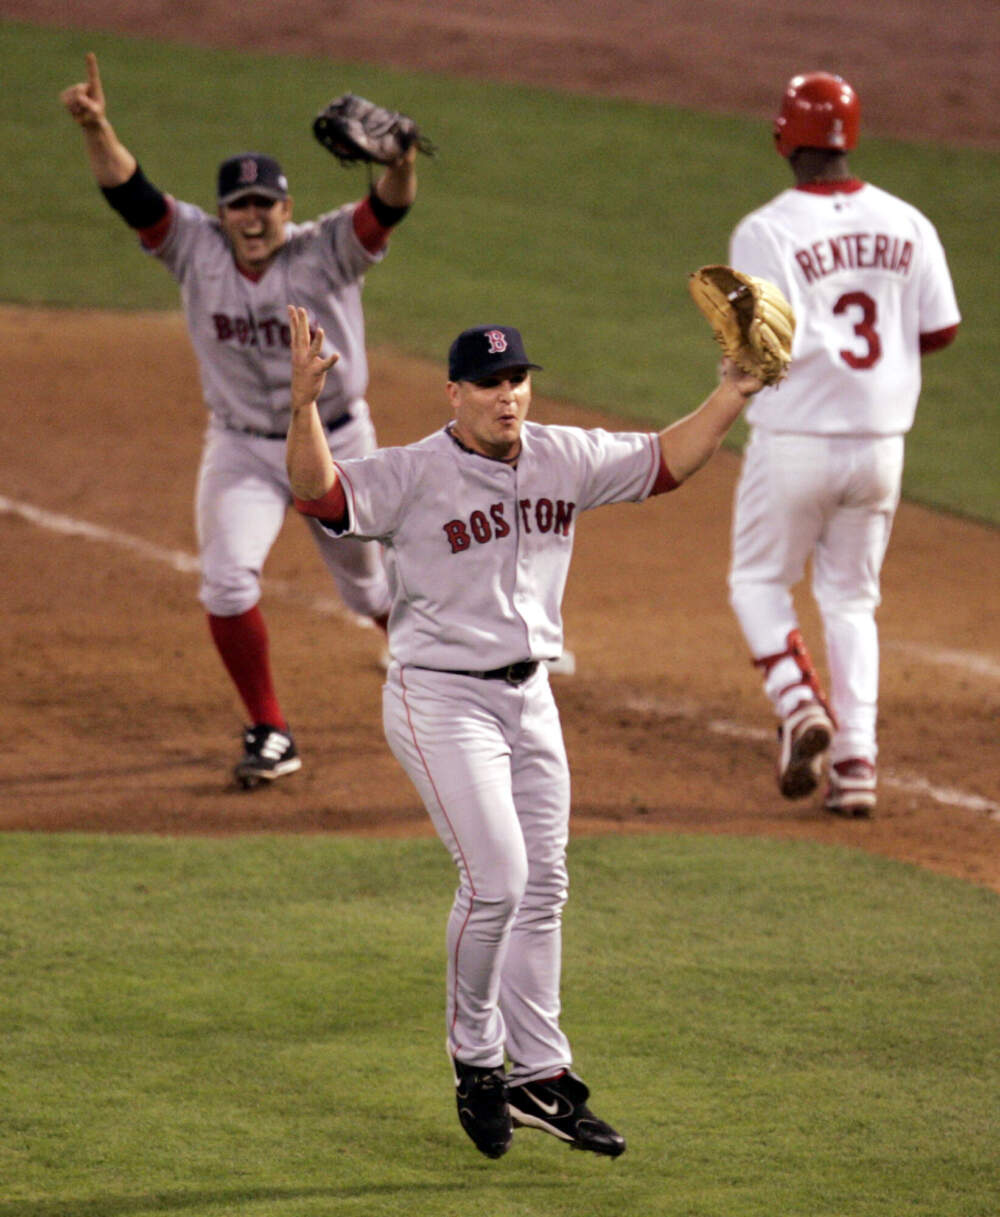 In this Oct. 27, 2004 file photo Boston Red Sox pitcher Keith Foulke, center, and first baseman Doug Mientkiewicz, left, celebrate after St. Louis Cardinals' Edgar Renteria (3) grounded out to end the ninth inning and give Boston a 3-0 win and a sweep of the World Series in St. Louis. (Mark Humphrey/AP)